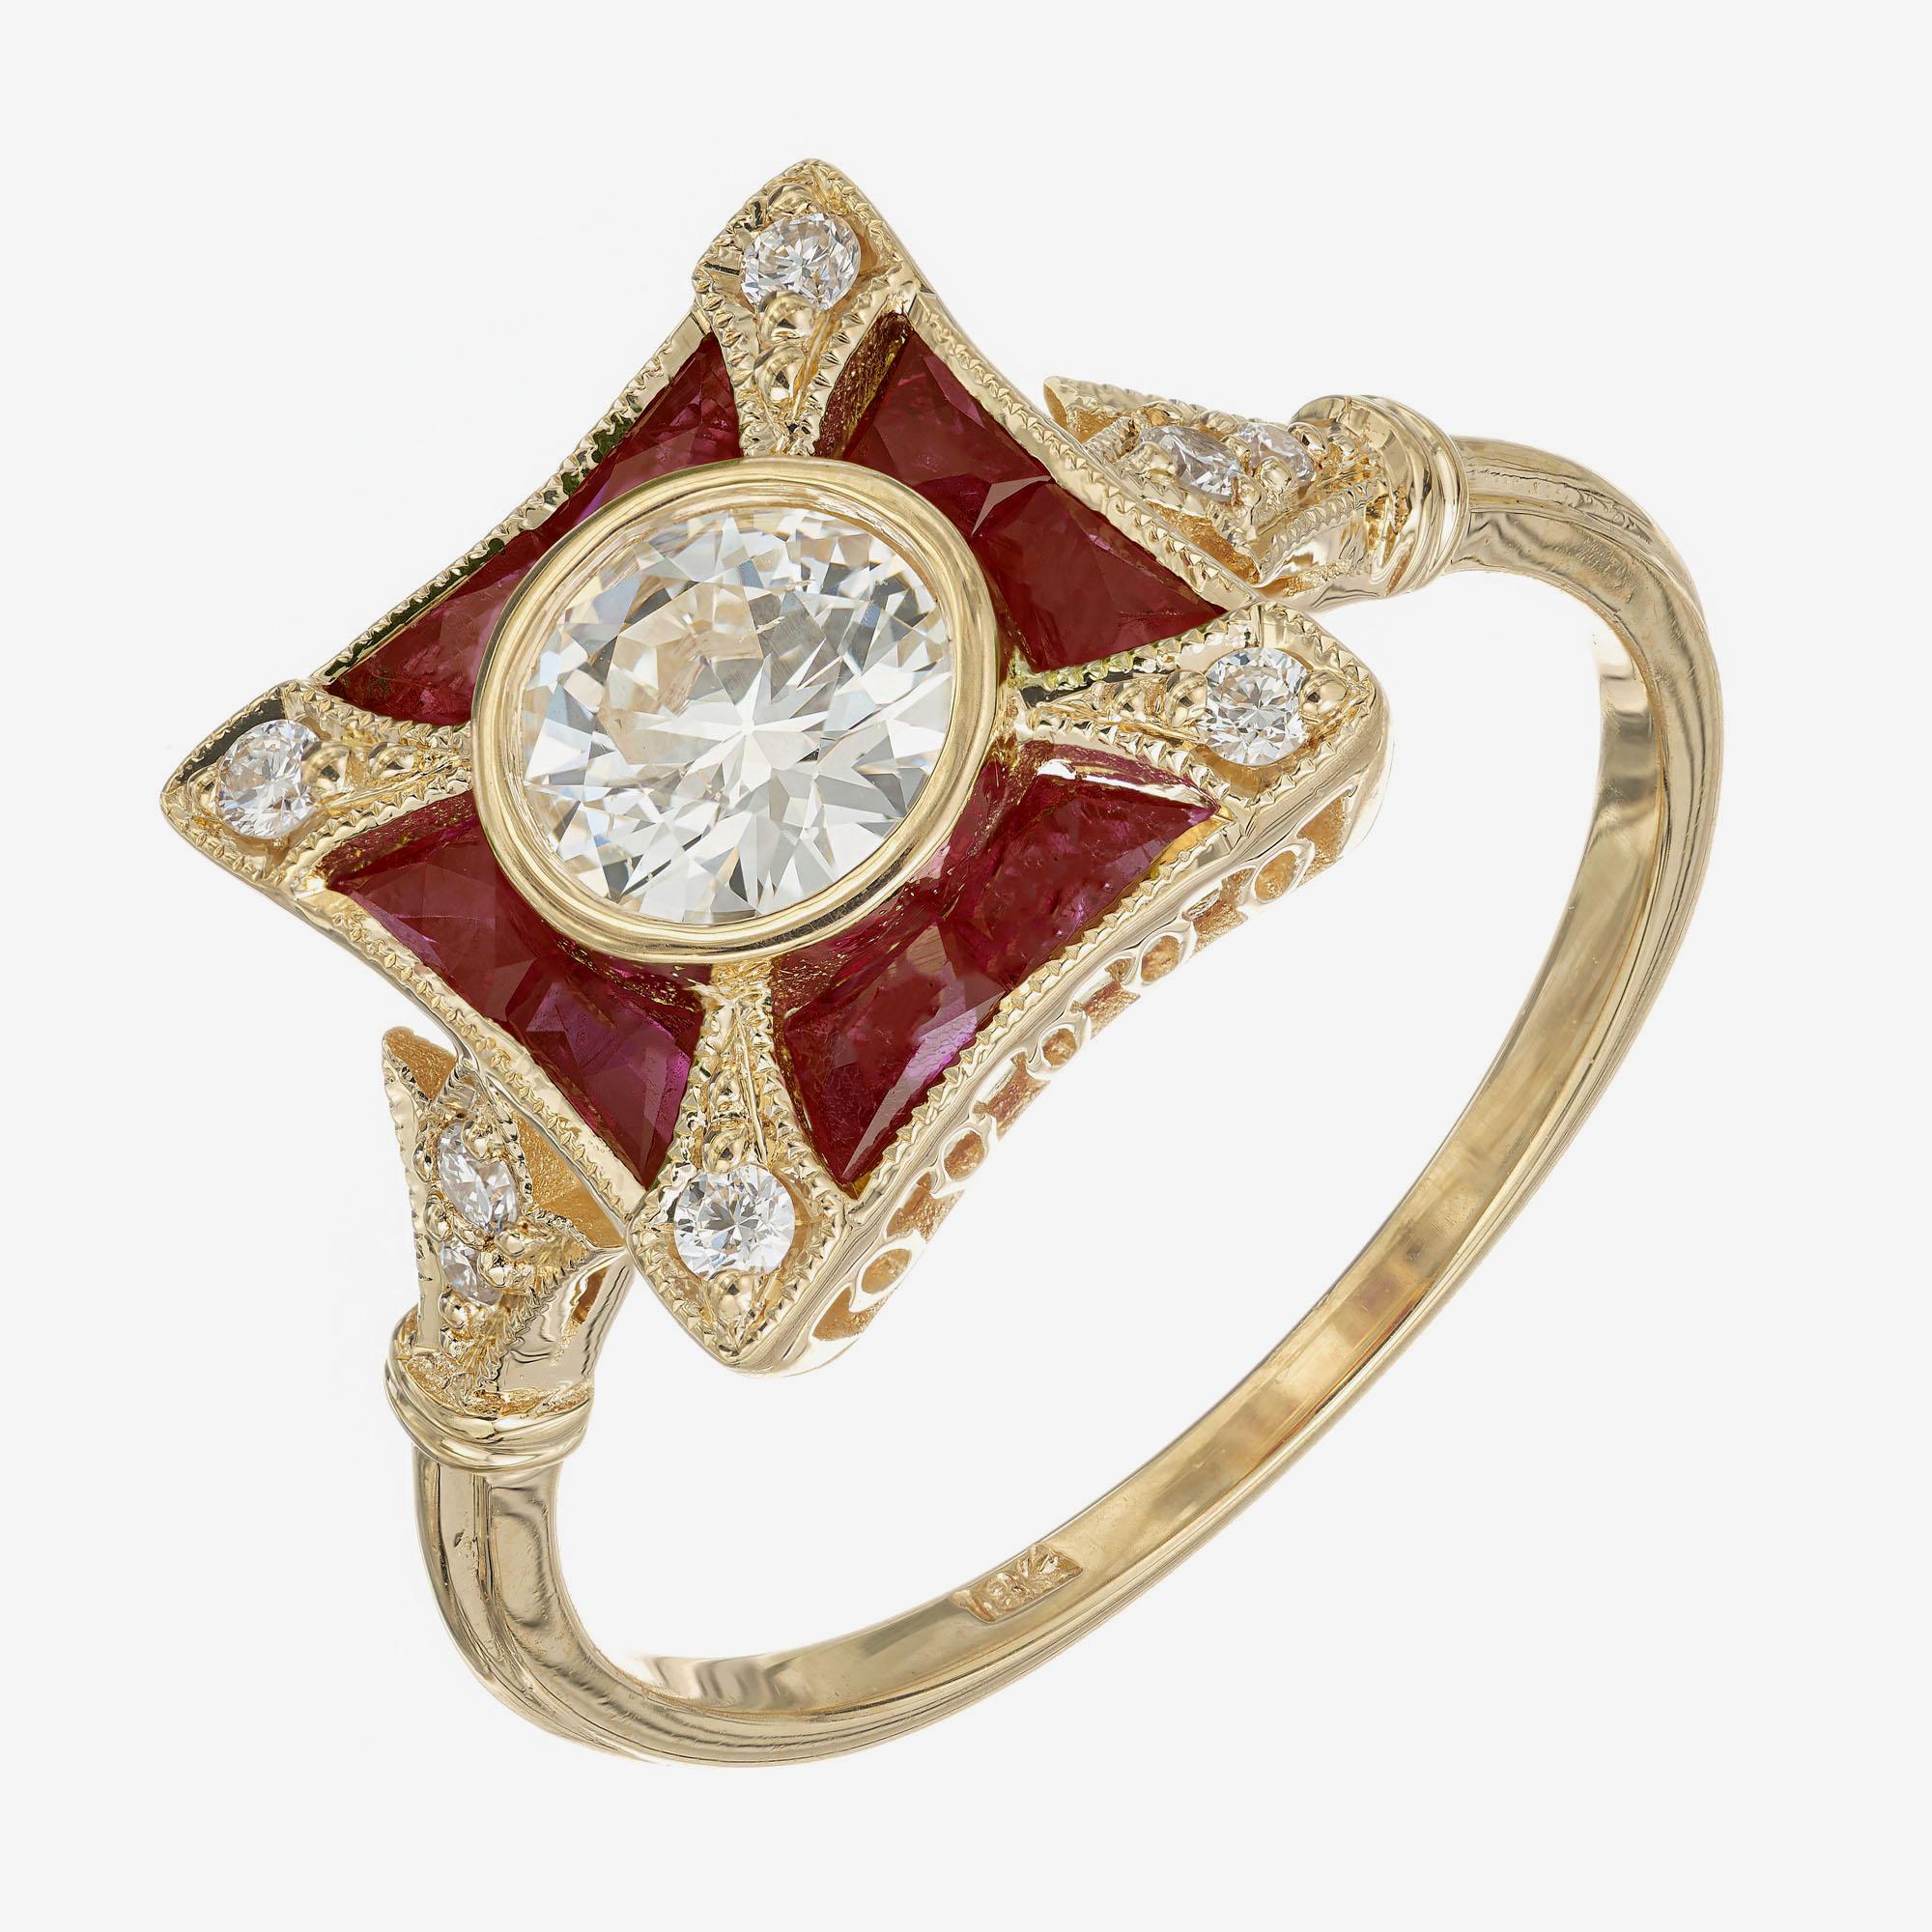 Antique inspired diamond and ruby engagement ring. GIA certified round brilliant cut bezel set center diamond with french cut ruby and round brilliant cut diamond accents in an 18k yellow gold setting. Designed and crafted in the Peter Suchy